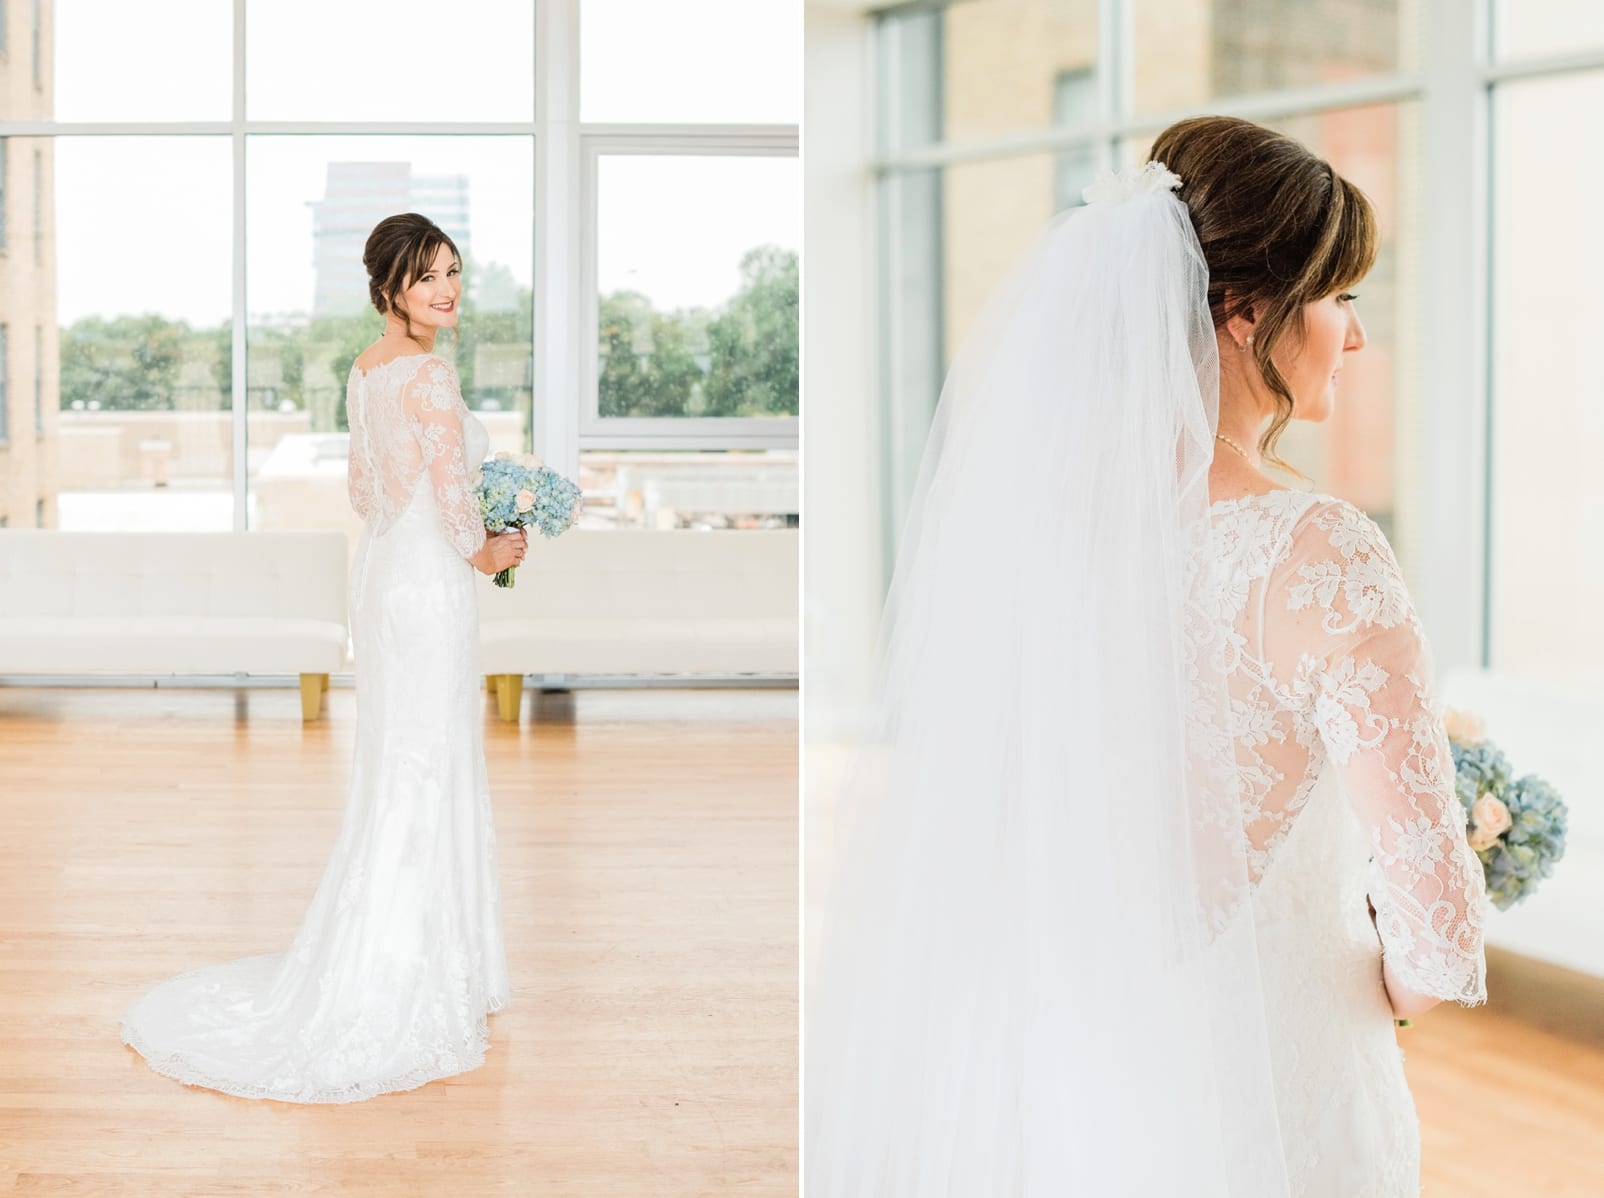 The Glass Box bride in a lace gown with a short train and a veil on photo